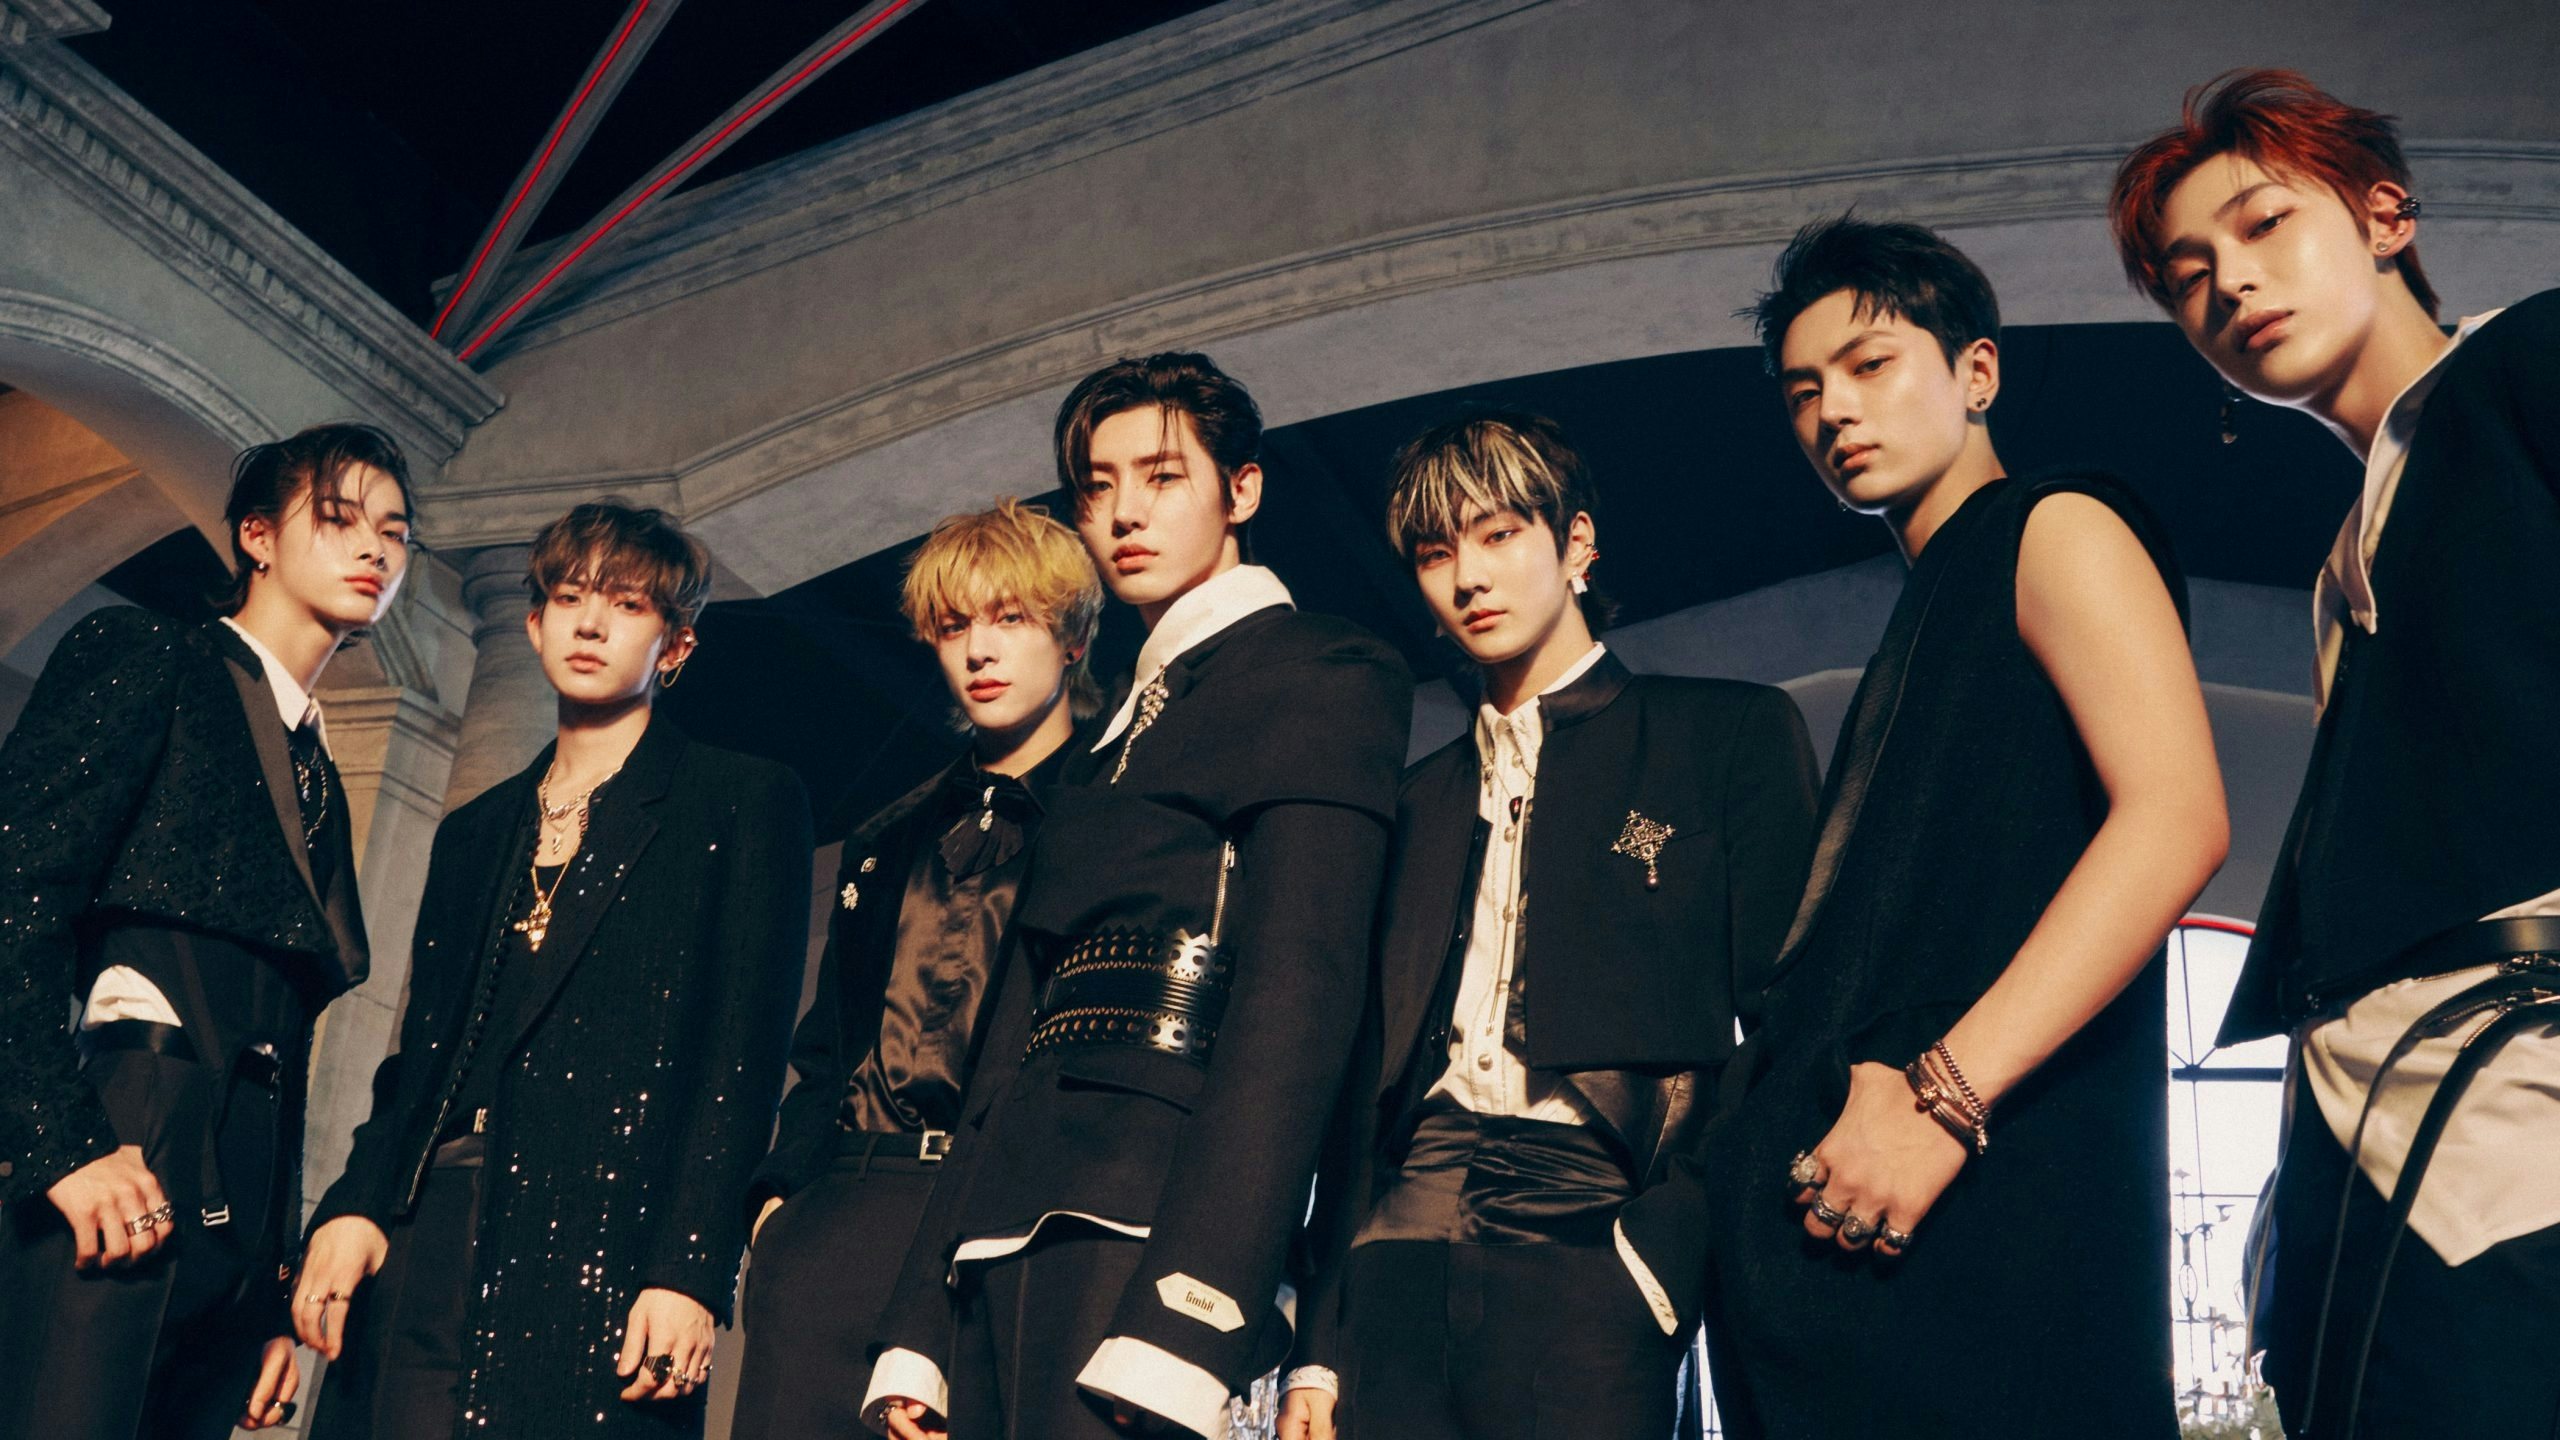 Enhypen joins a growing list of K-pop groups and artists recruited by luxury brands seeking to woo the millions of global fans alongside such acts. Photo: Belift Lab